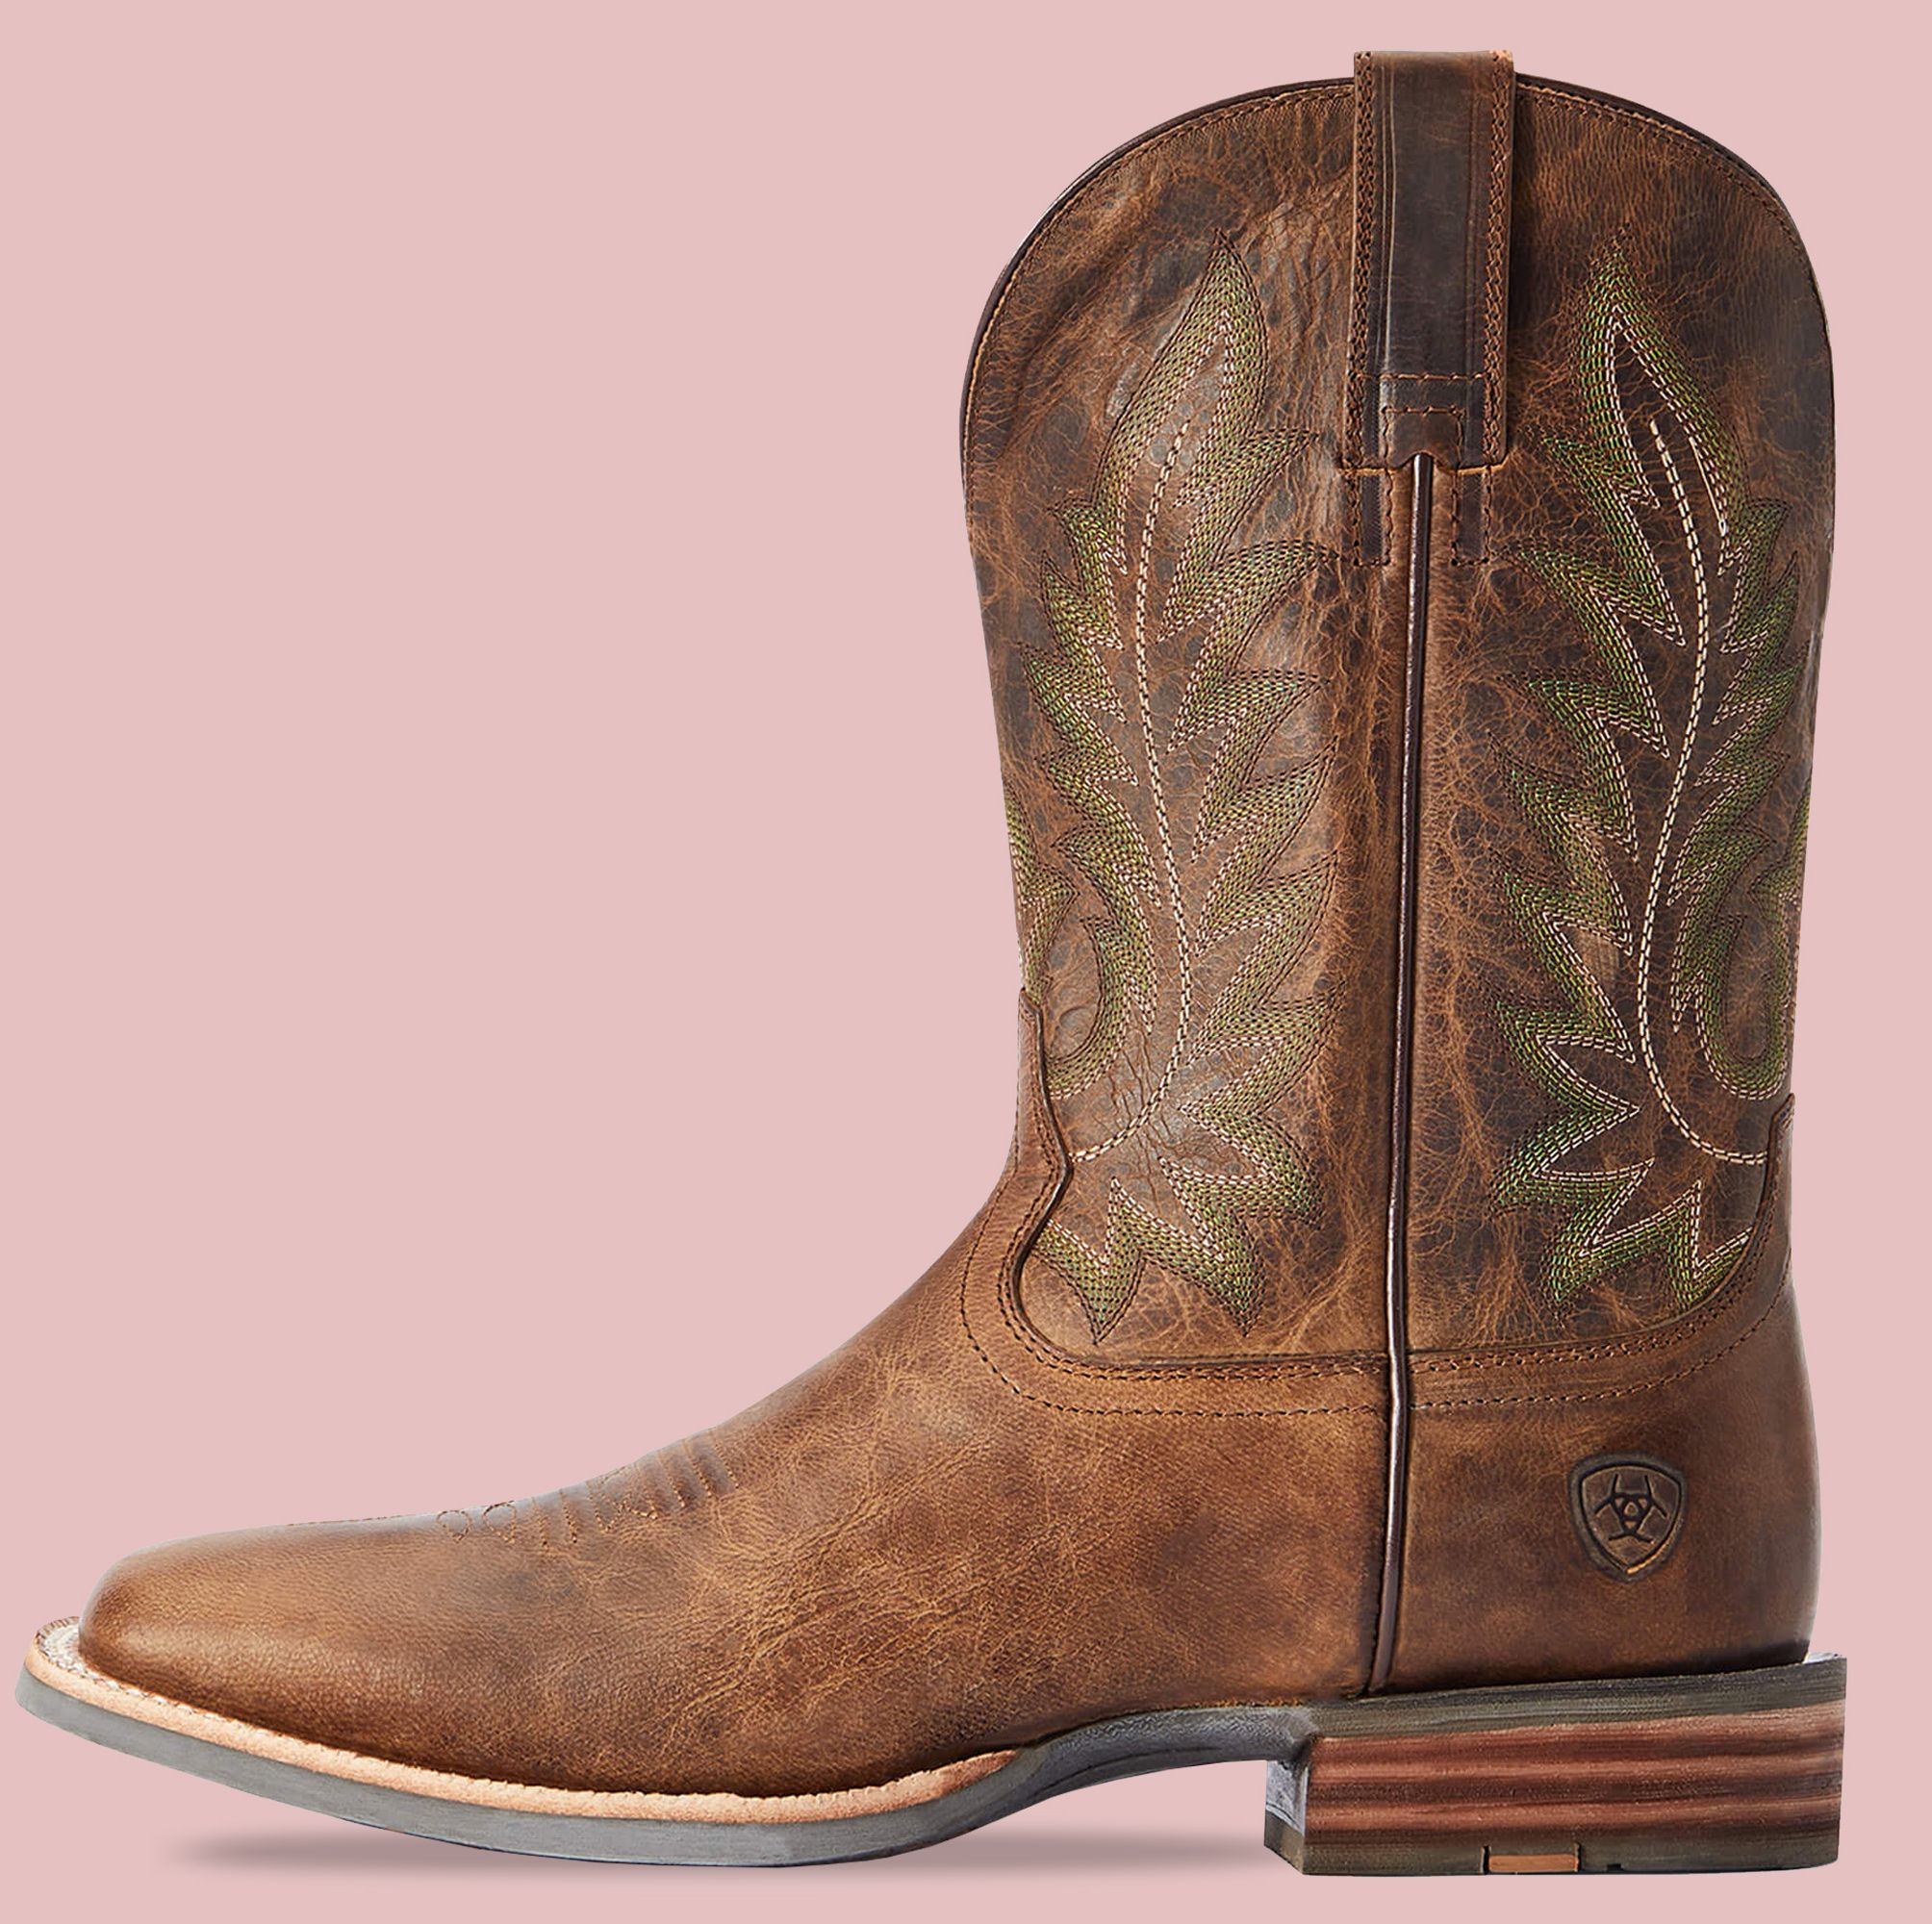 13 Cowboy Boot Brands That Prove Western Style Is Here to Stay